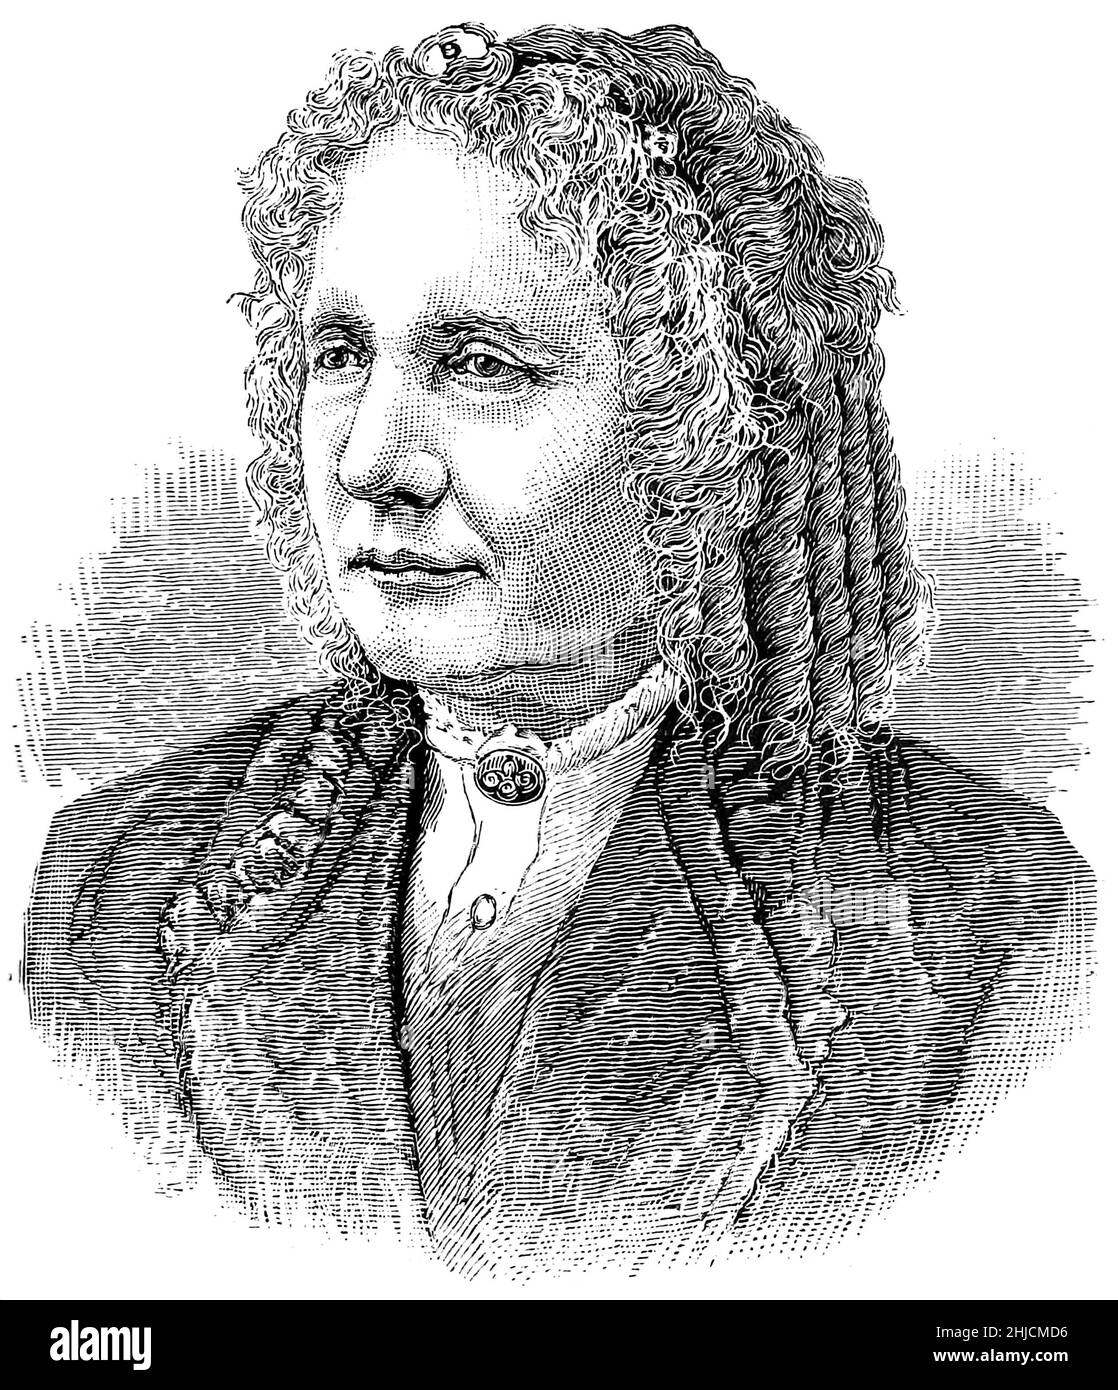 Harriet Beecher Stowe 1(811-1896), American abolitionist and author of Uncle Tom's Cabin (1852). Illustration from 1885 by James Parton. Stock Photo